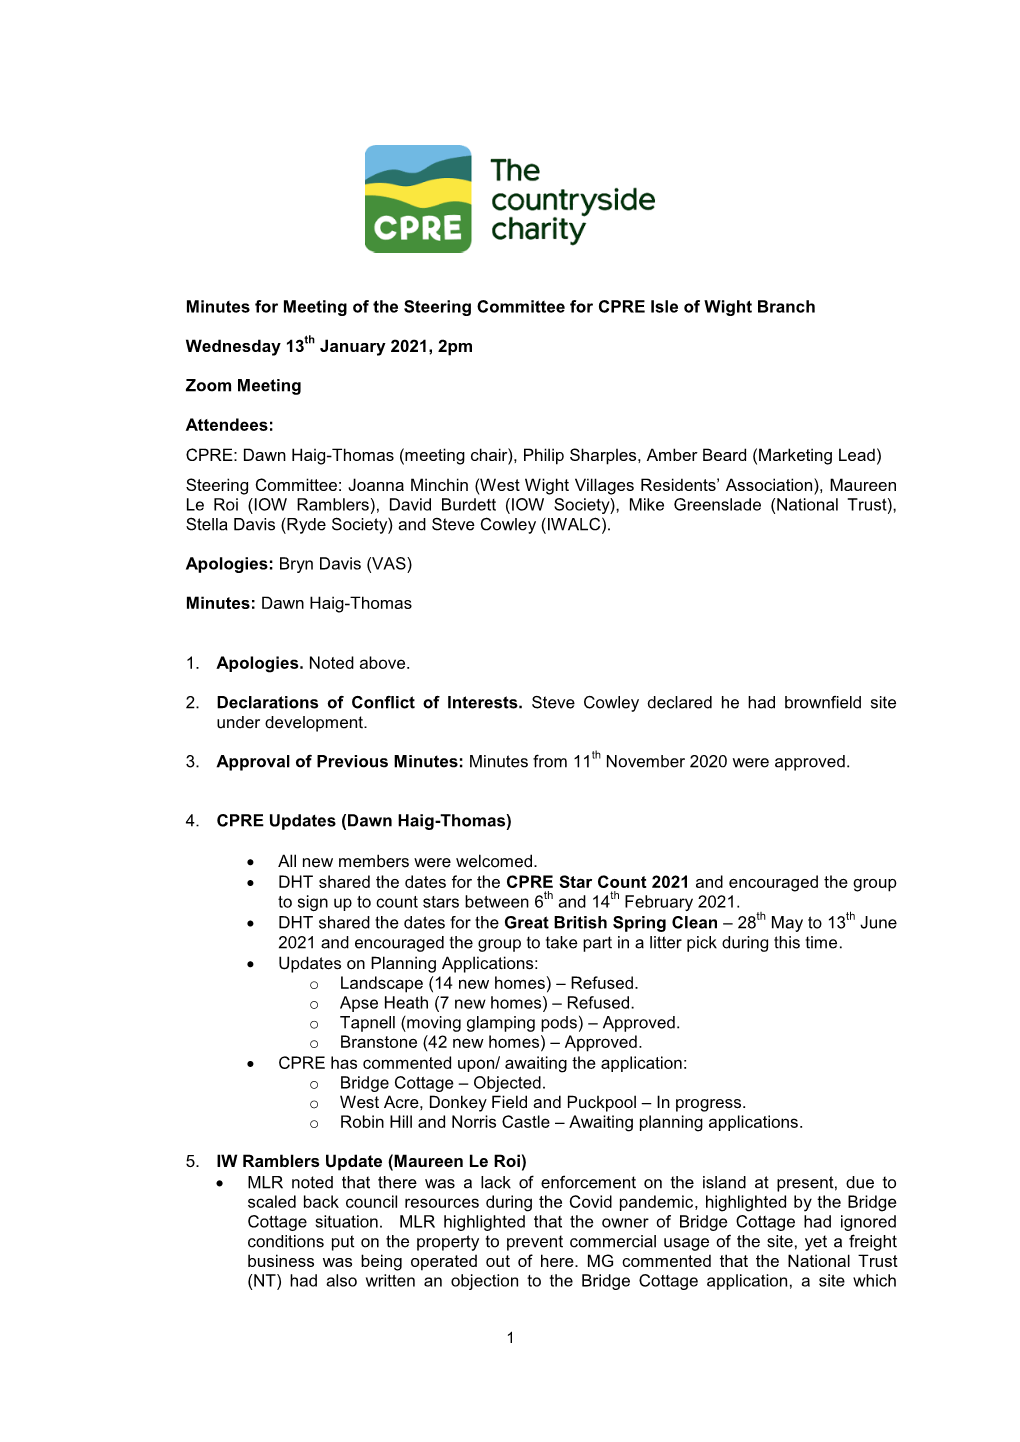 Minutes for Meeting of the Steering Committee for CPRE Isle of Wight Branch